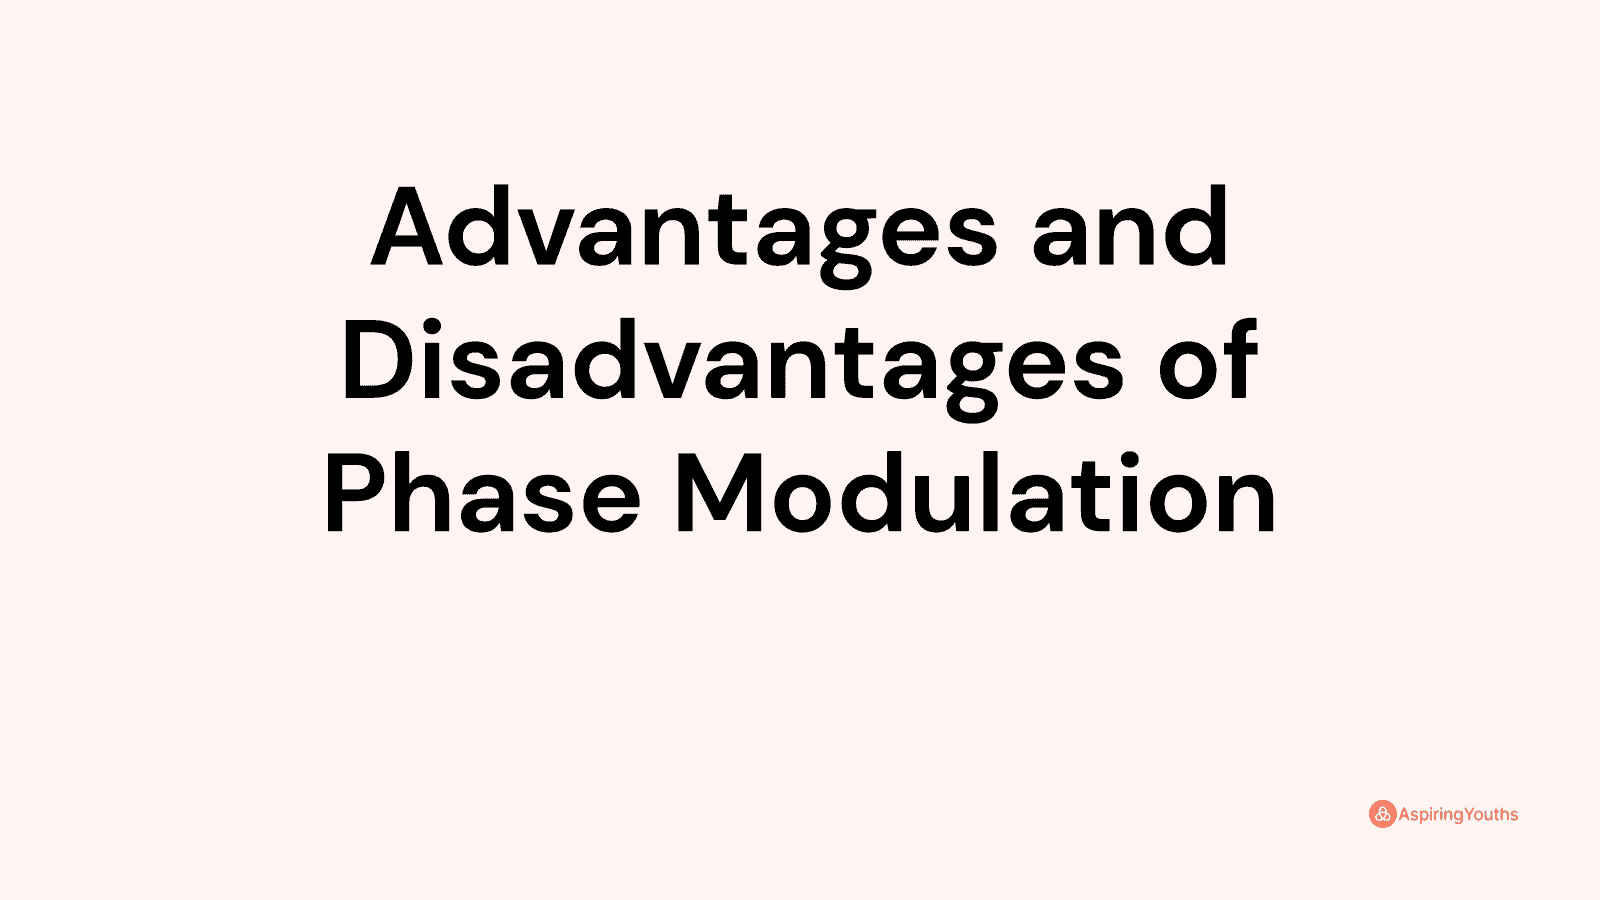 Advantages and disadvantages of Phase Modulation